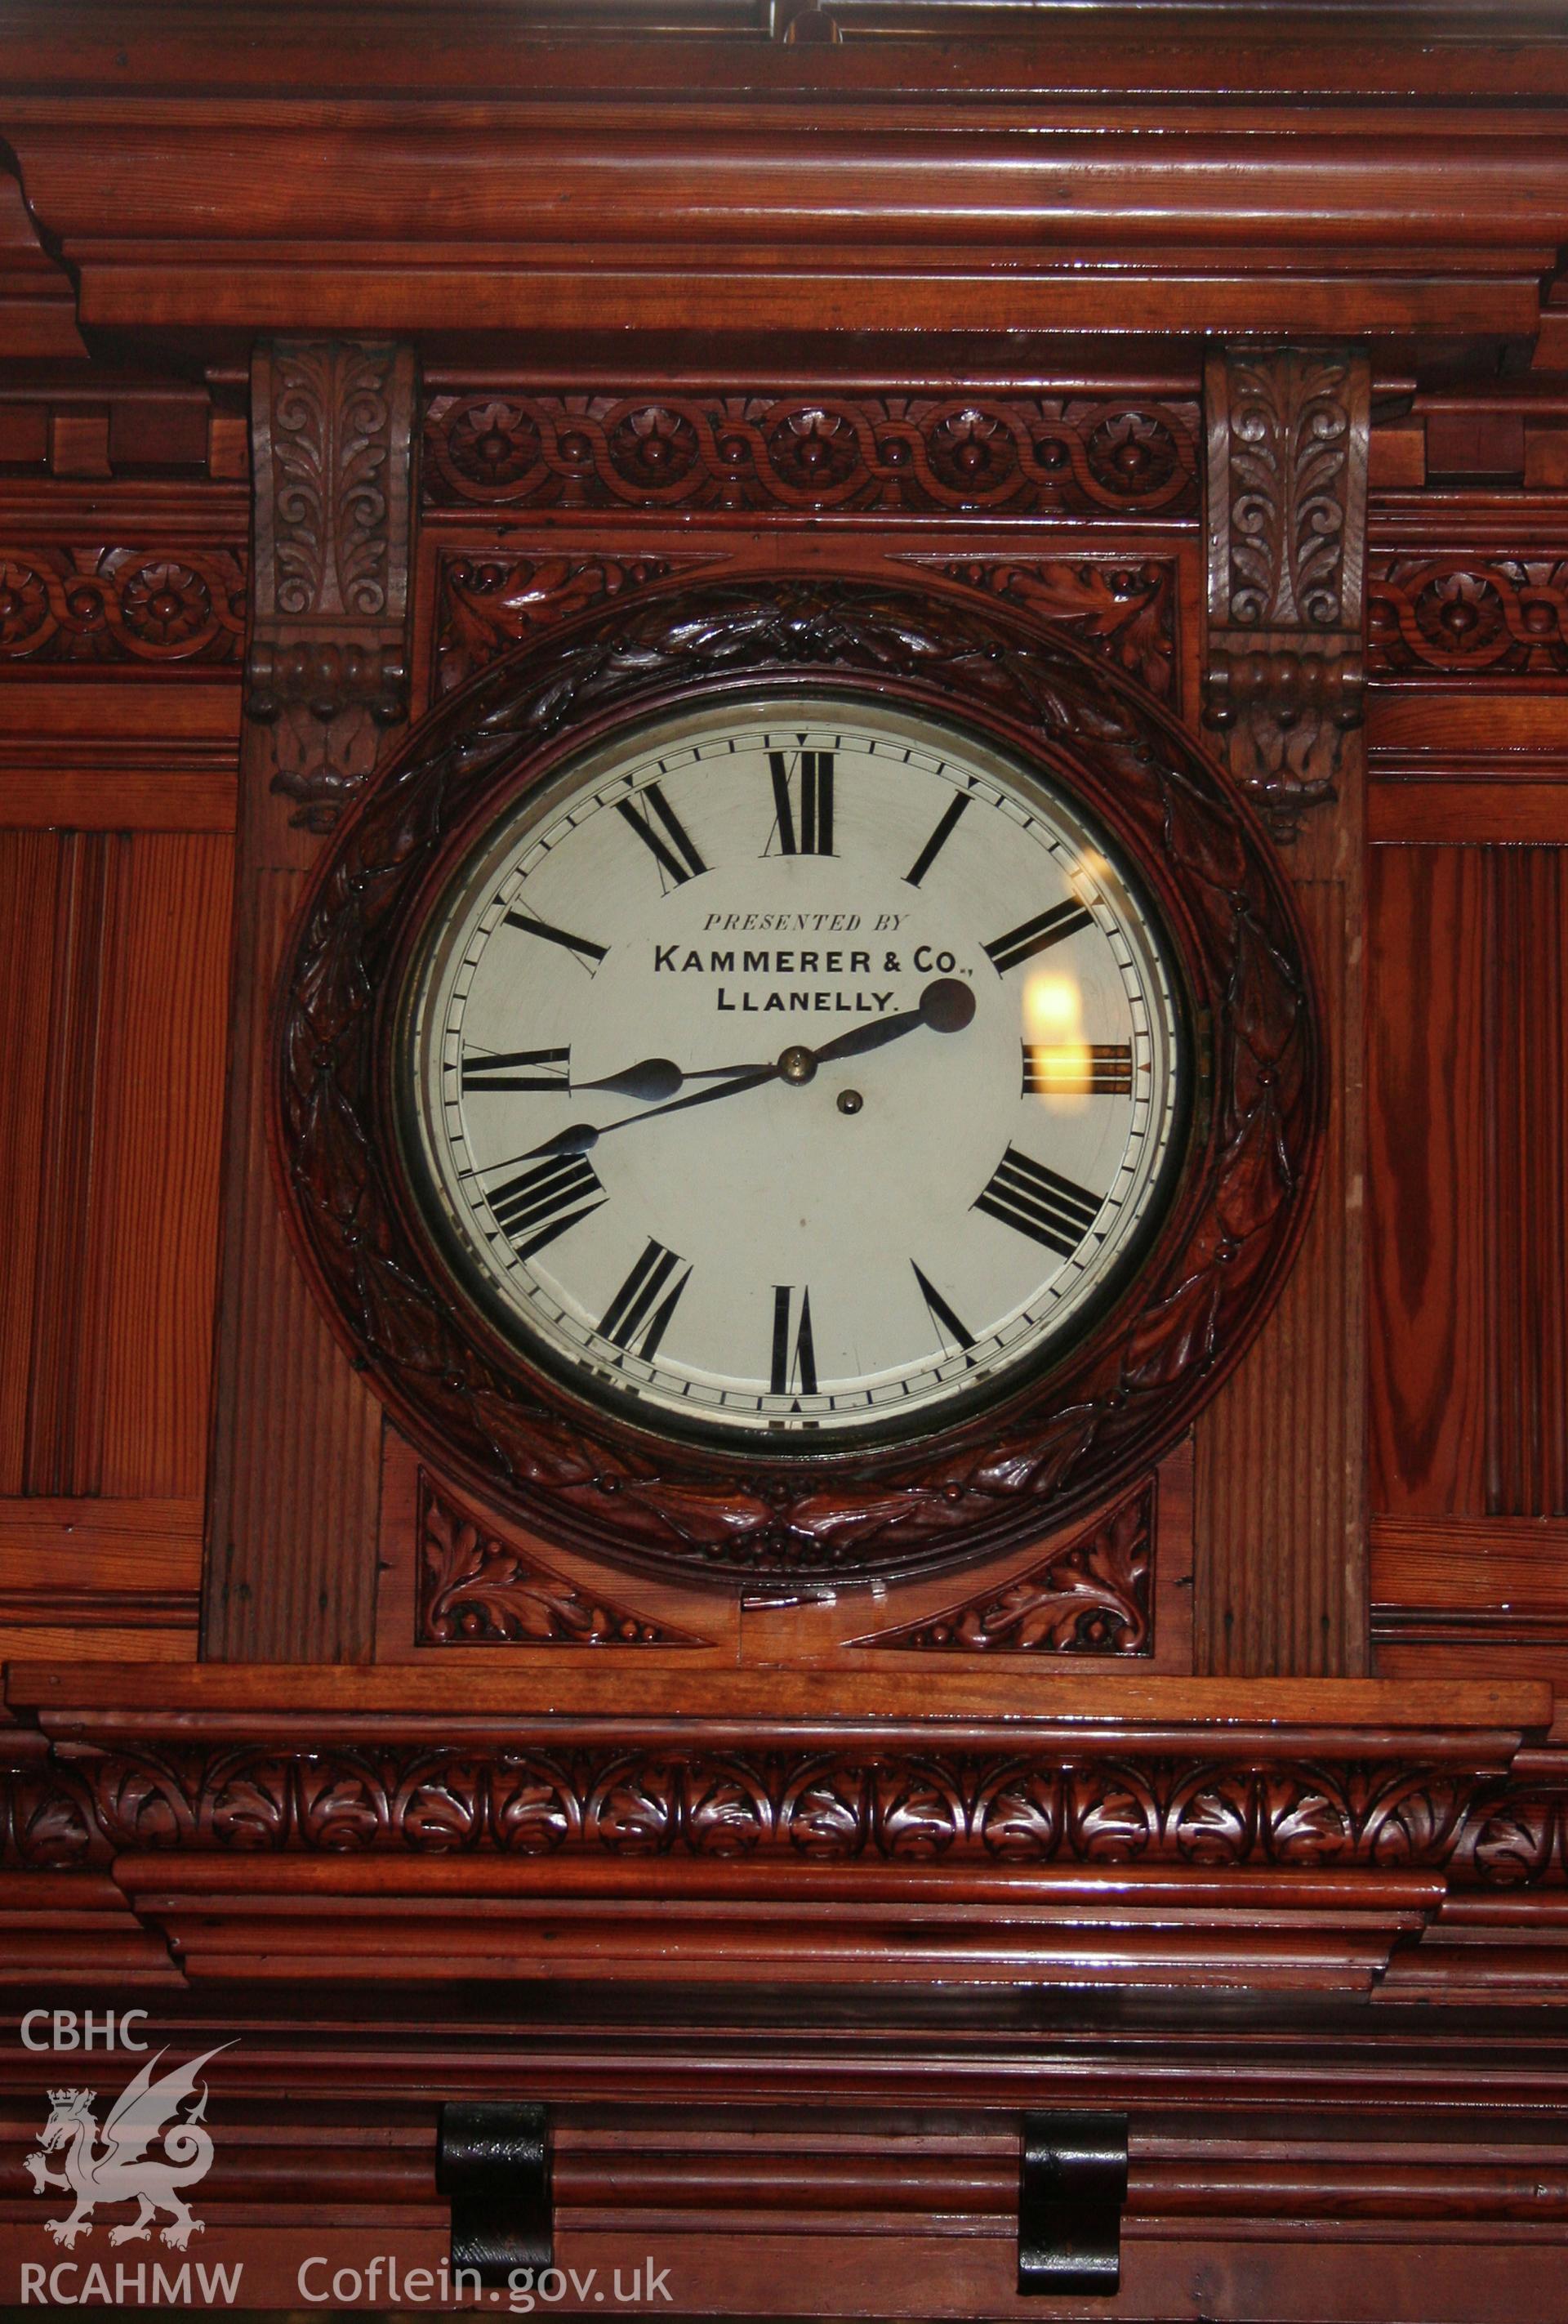 Capel Als, detail of the clock in gallery front opposite the Sedd Fawr.